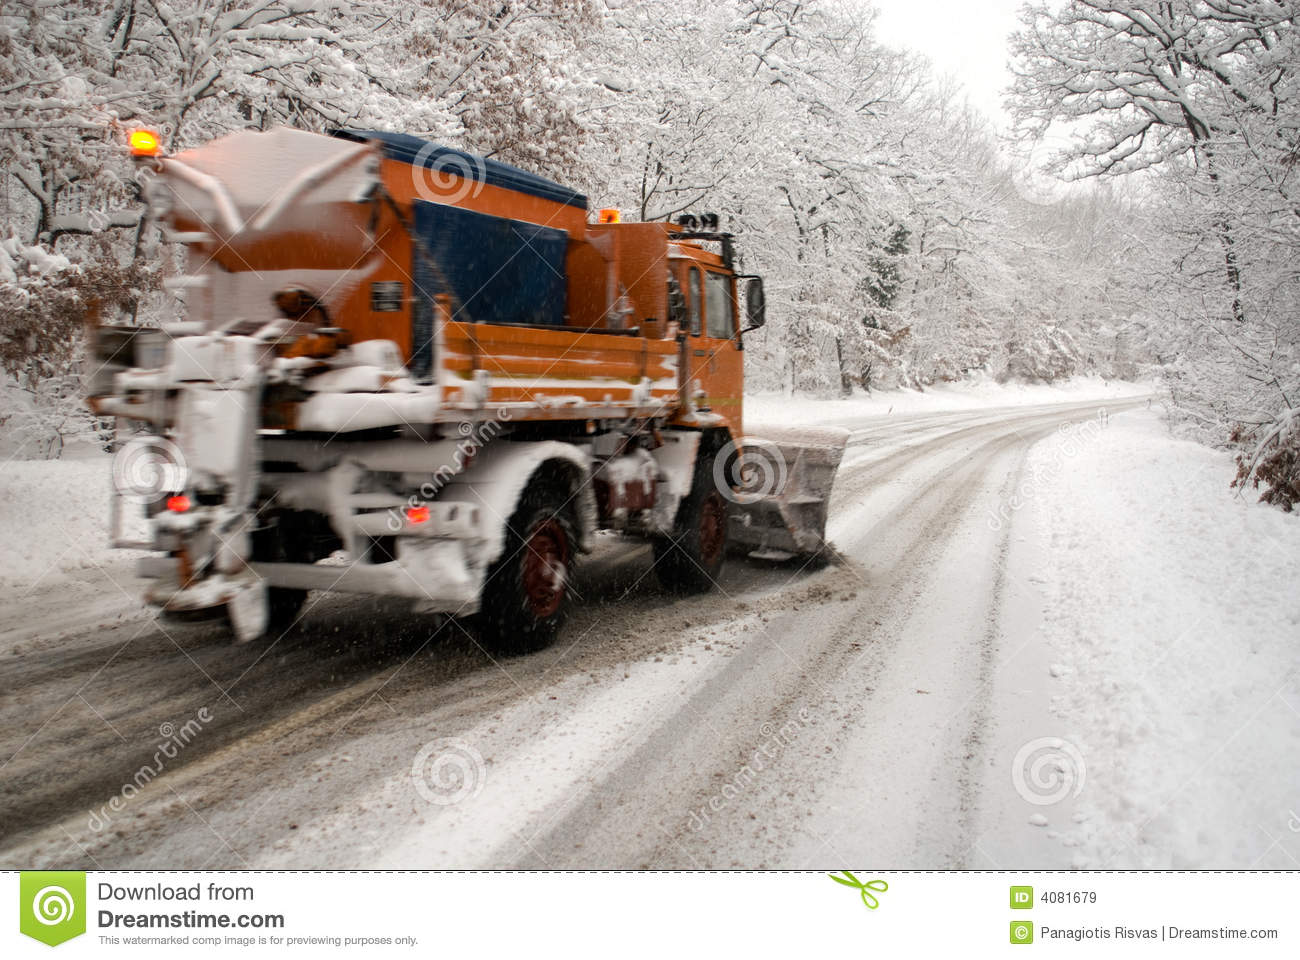 Snow Plow In Action Royalty Free Stock Images   Image  4081679